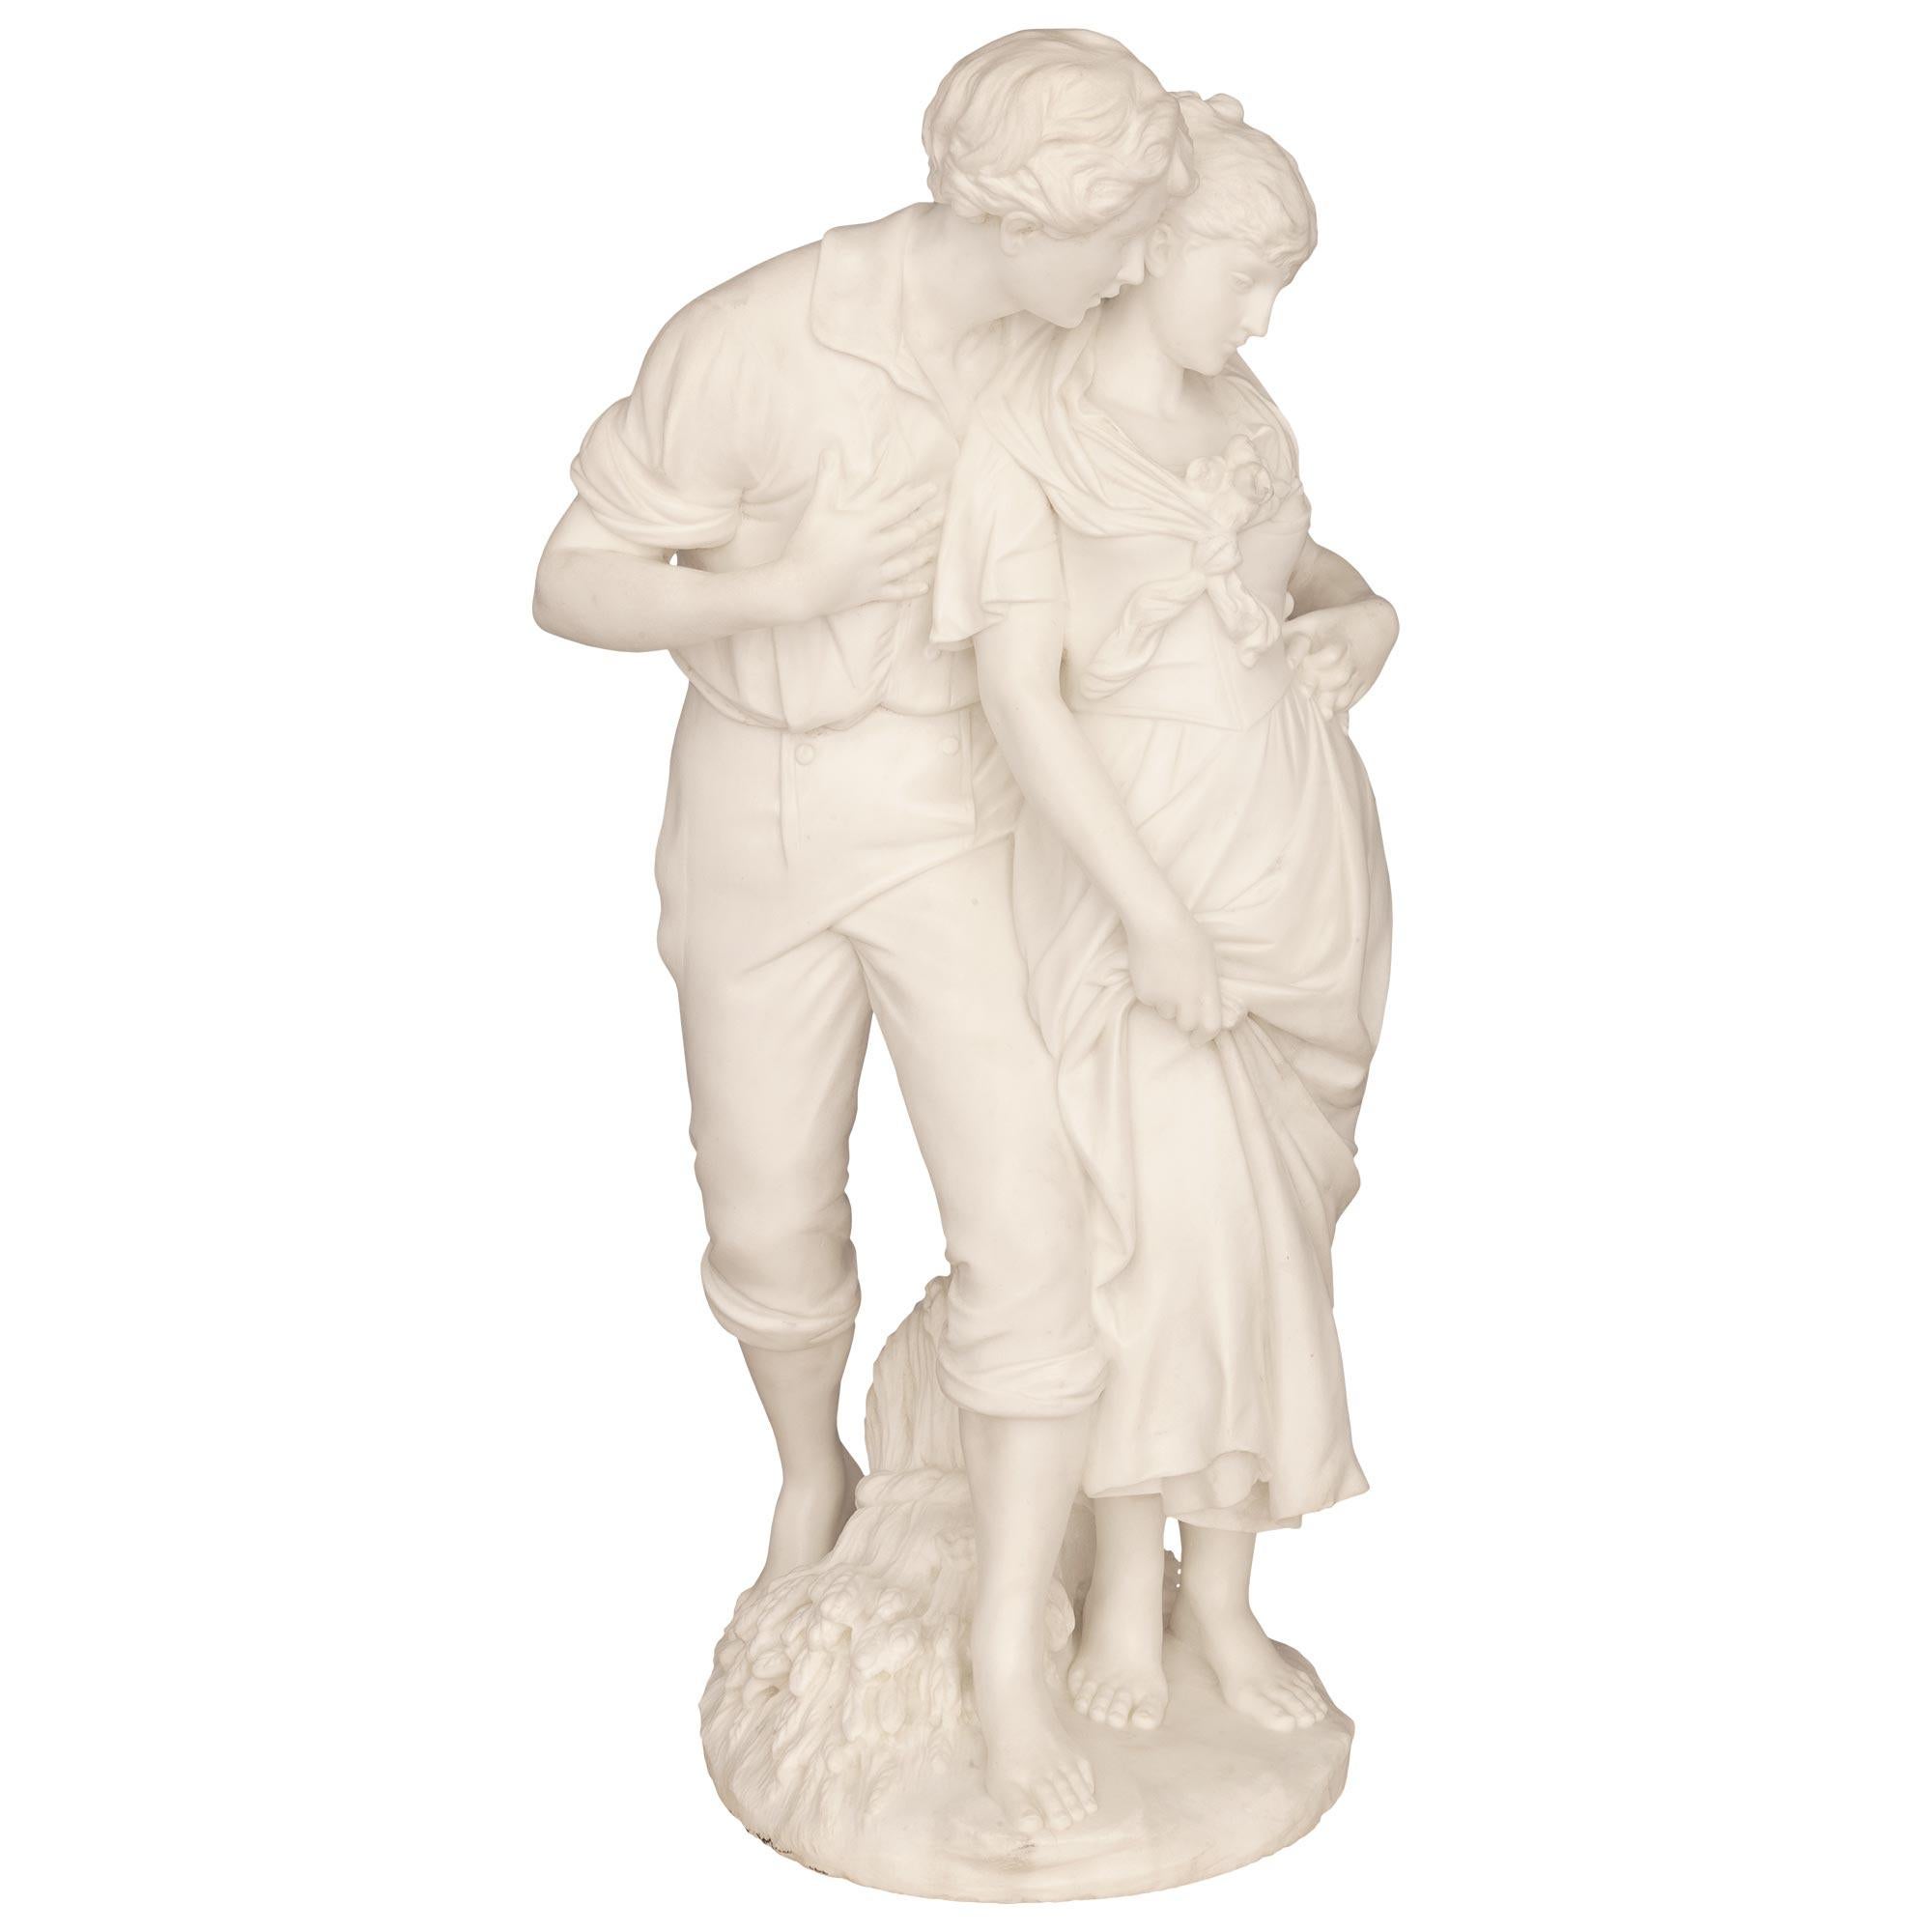 A stunning and most charming Italian 19th century white Carrara marble statue of young courtship. The romantic statue is raised by a circular base with a fine ground design where the lovers are standing with a sheaf at their feet. The beautiful